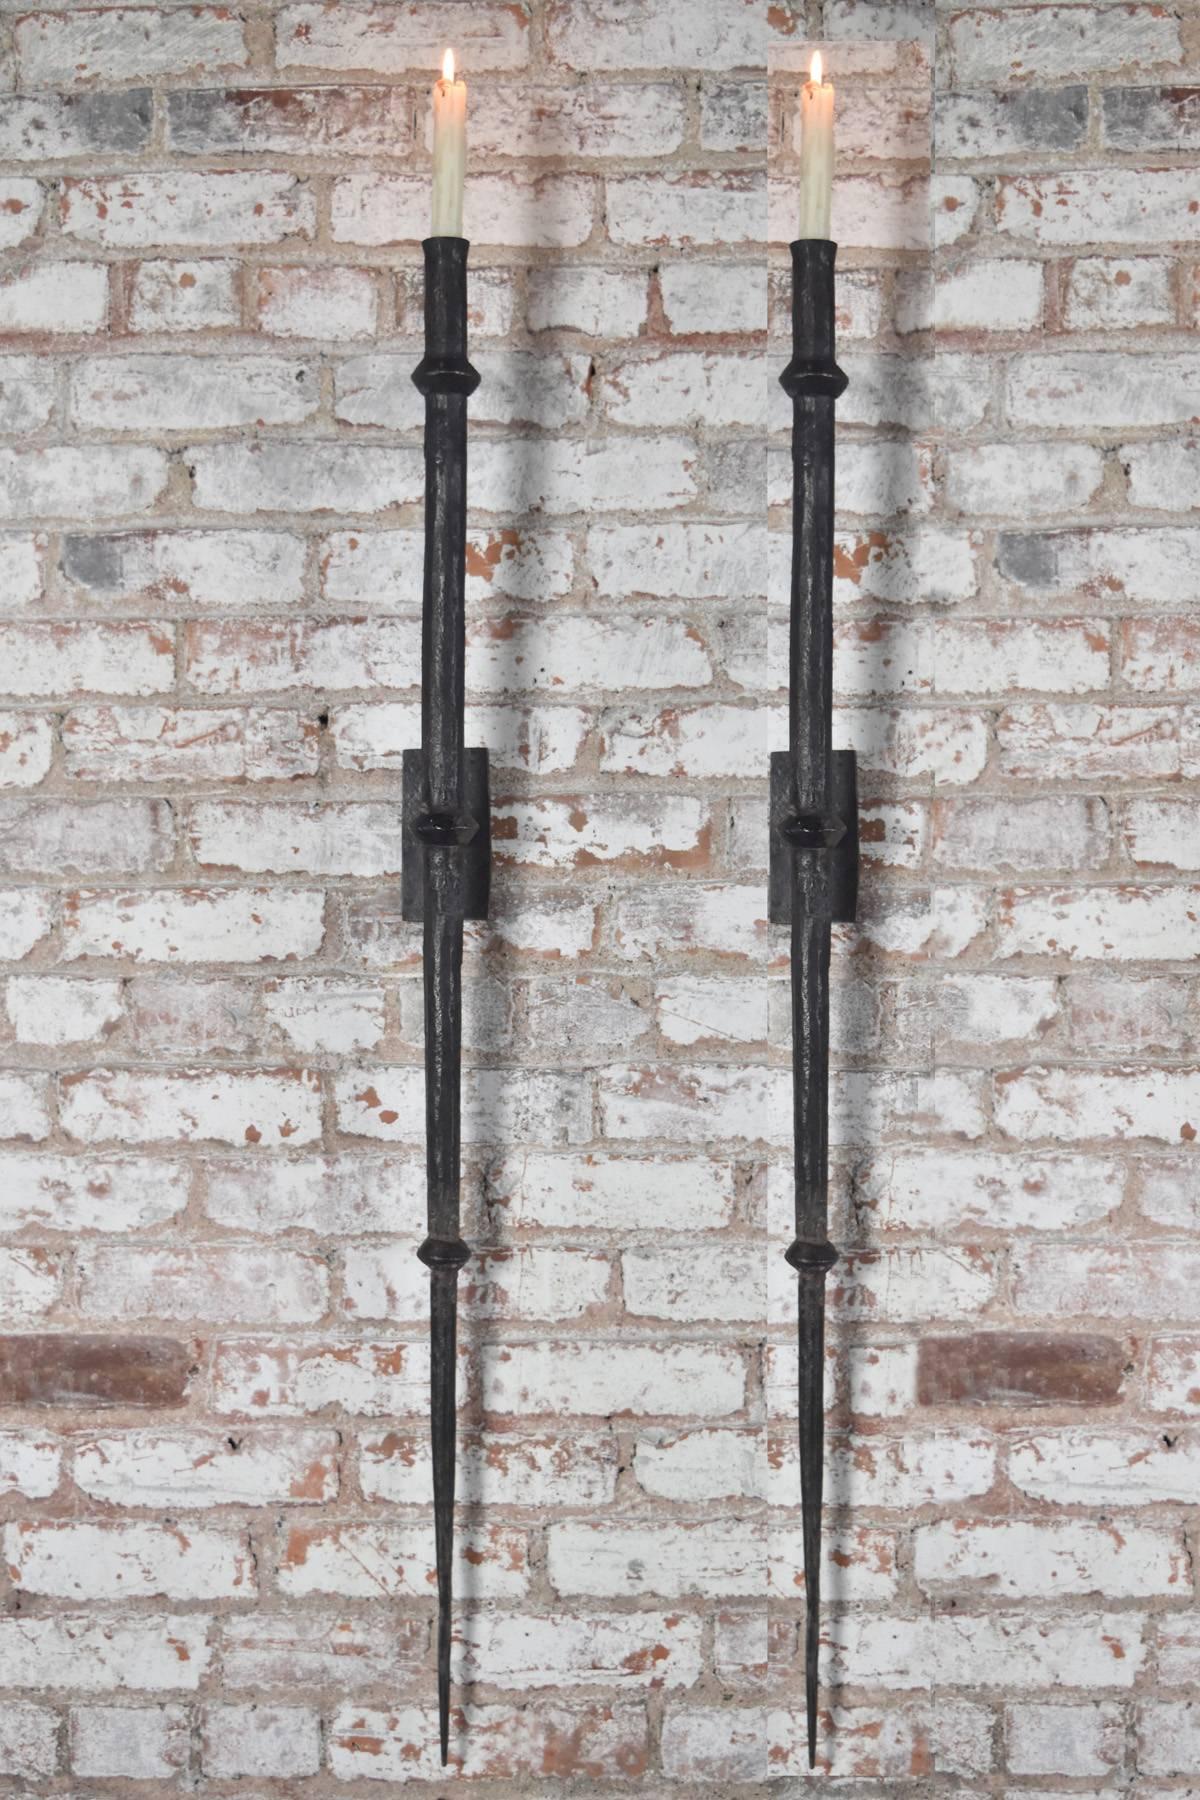 Large, hand-forged wrought iron wall sconces, timeless, bold and stark appearance, exclusively designed for the Fortress, each sconce is individually hand-forged by local artisans; small variations in texture and size are a natural feature.
Tapered